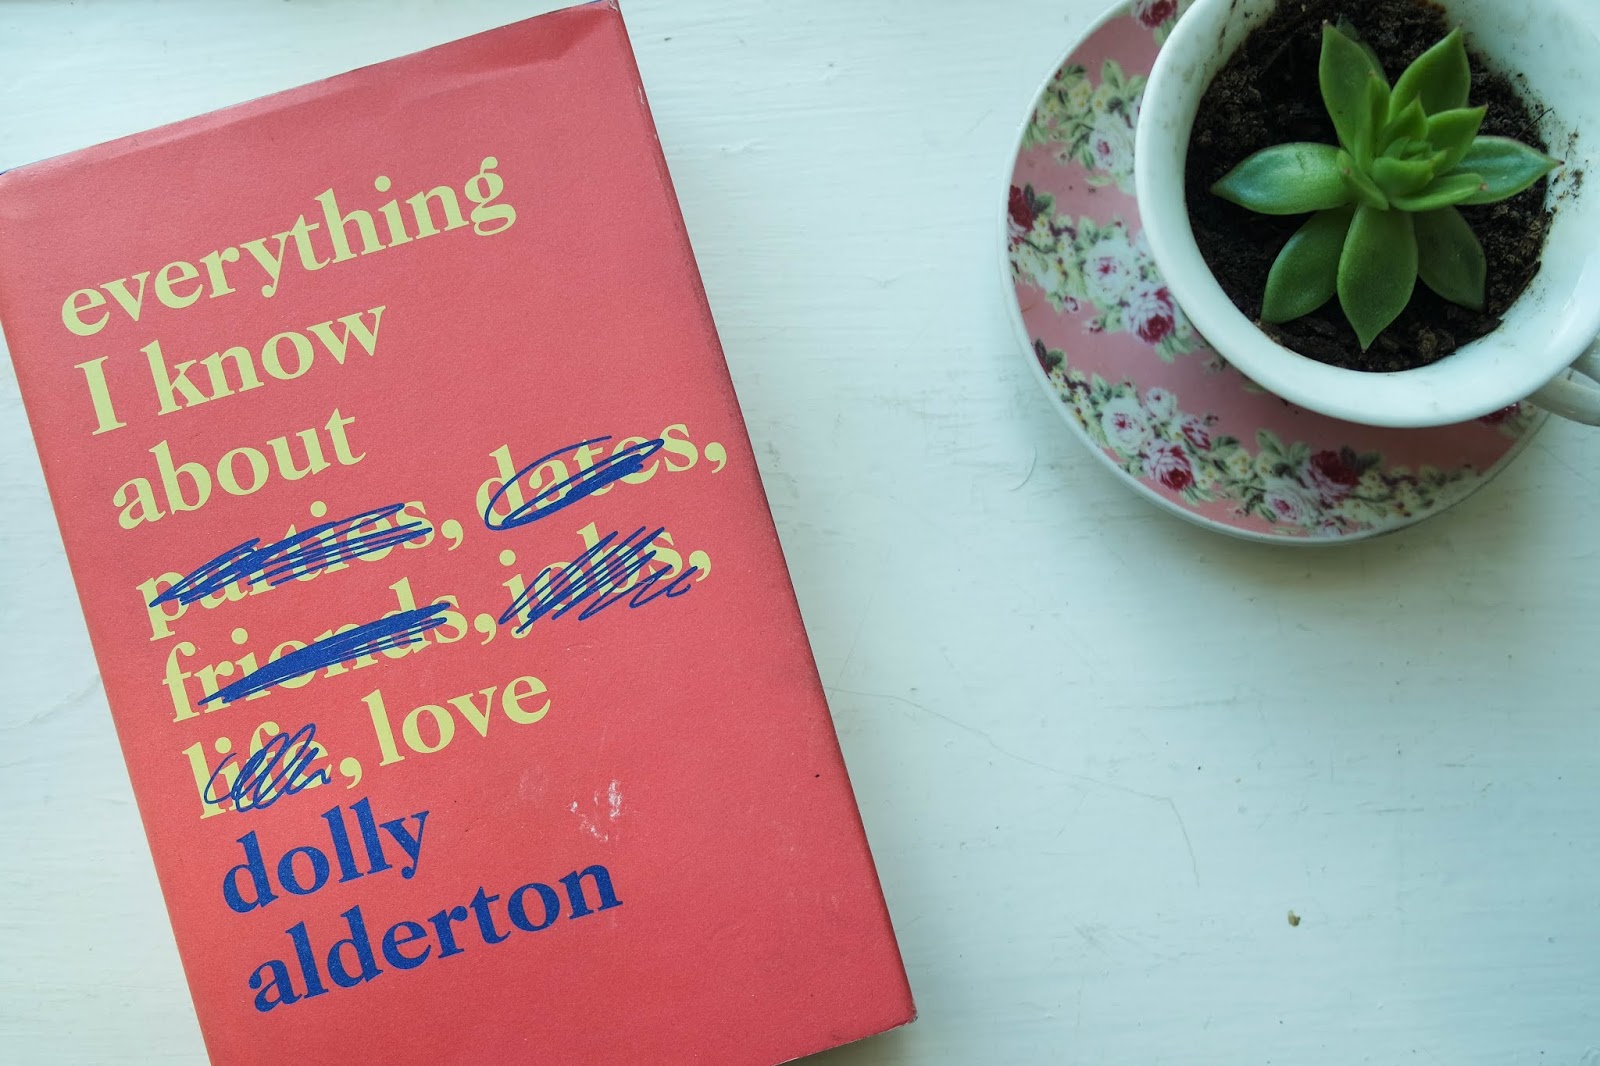 Typewriter Teeth.: 'Everything I Know About Love' by Dolly Alderton &  London's Big Read 2019